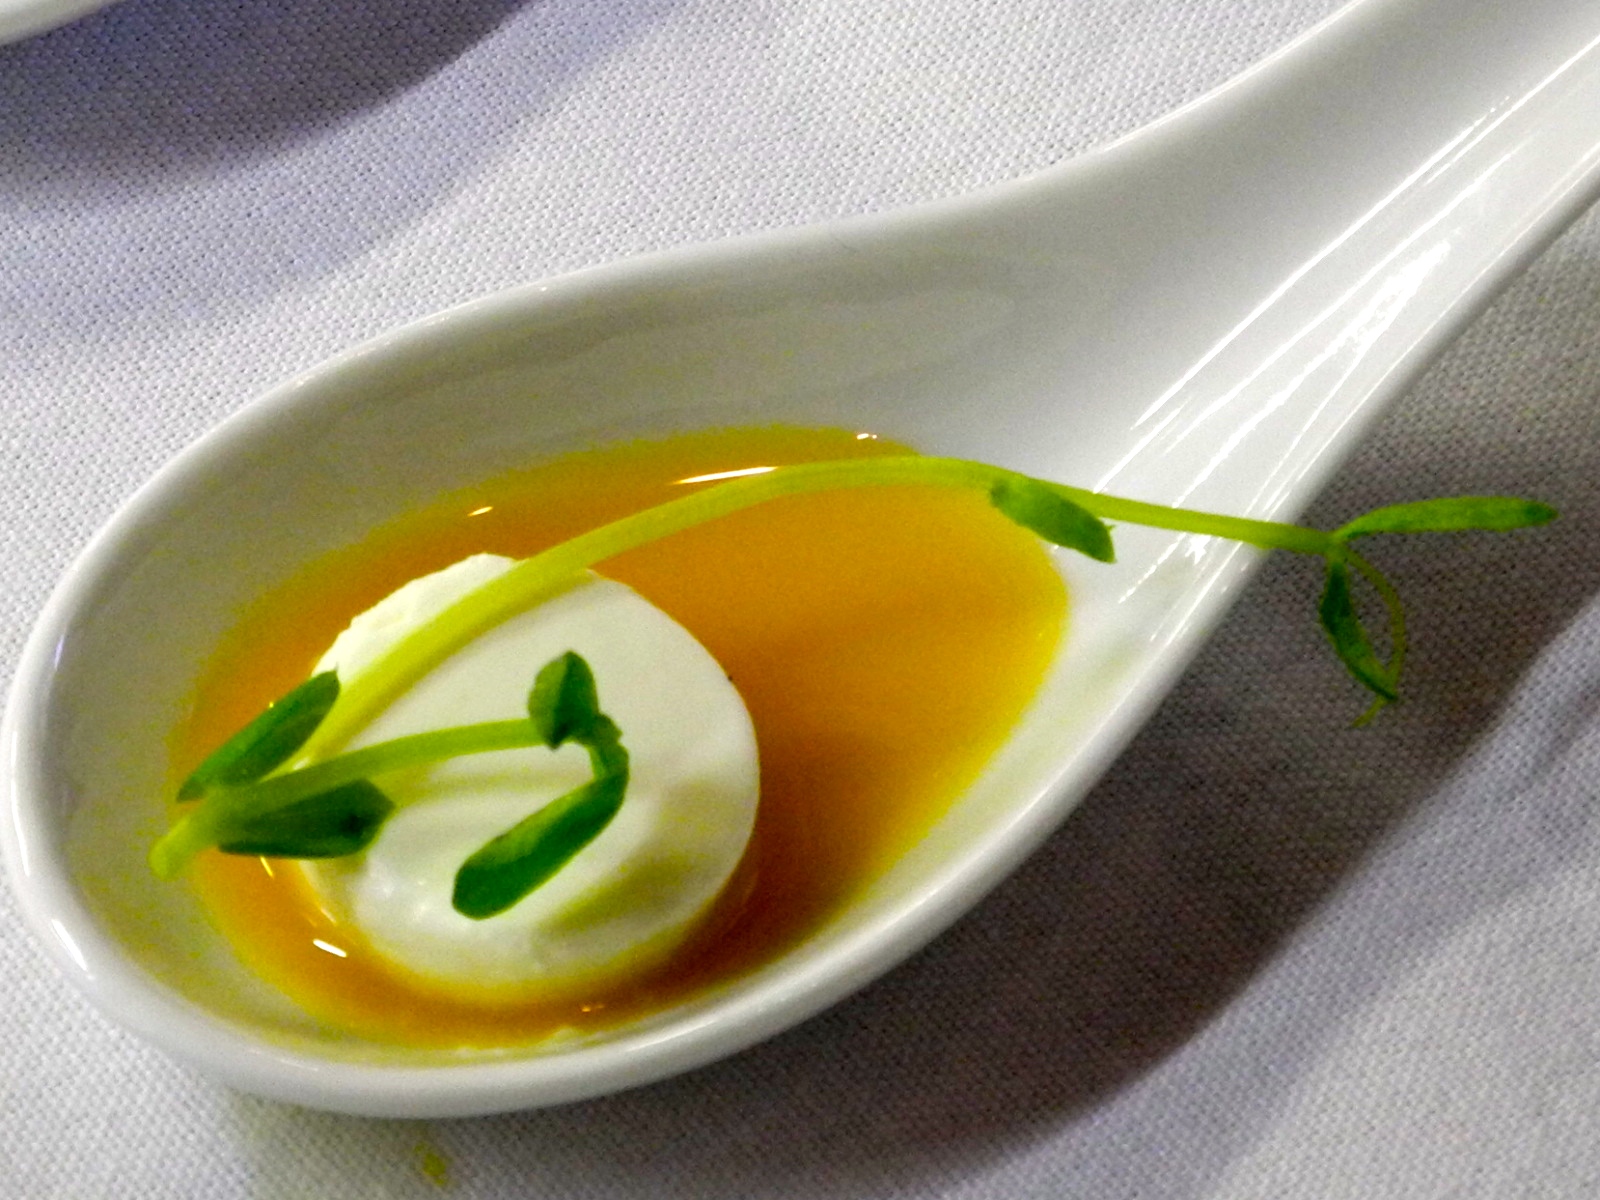 Goat Cheese Panna Cotta with an orange reduction garnished with pea shoots